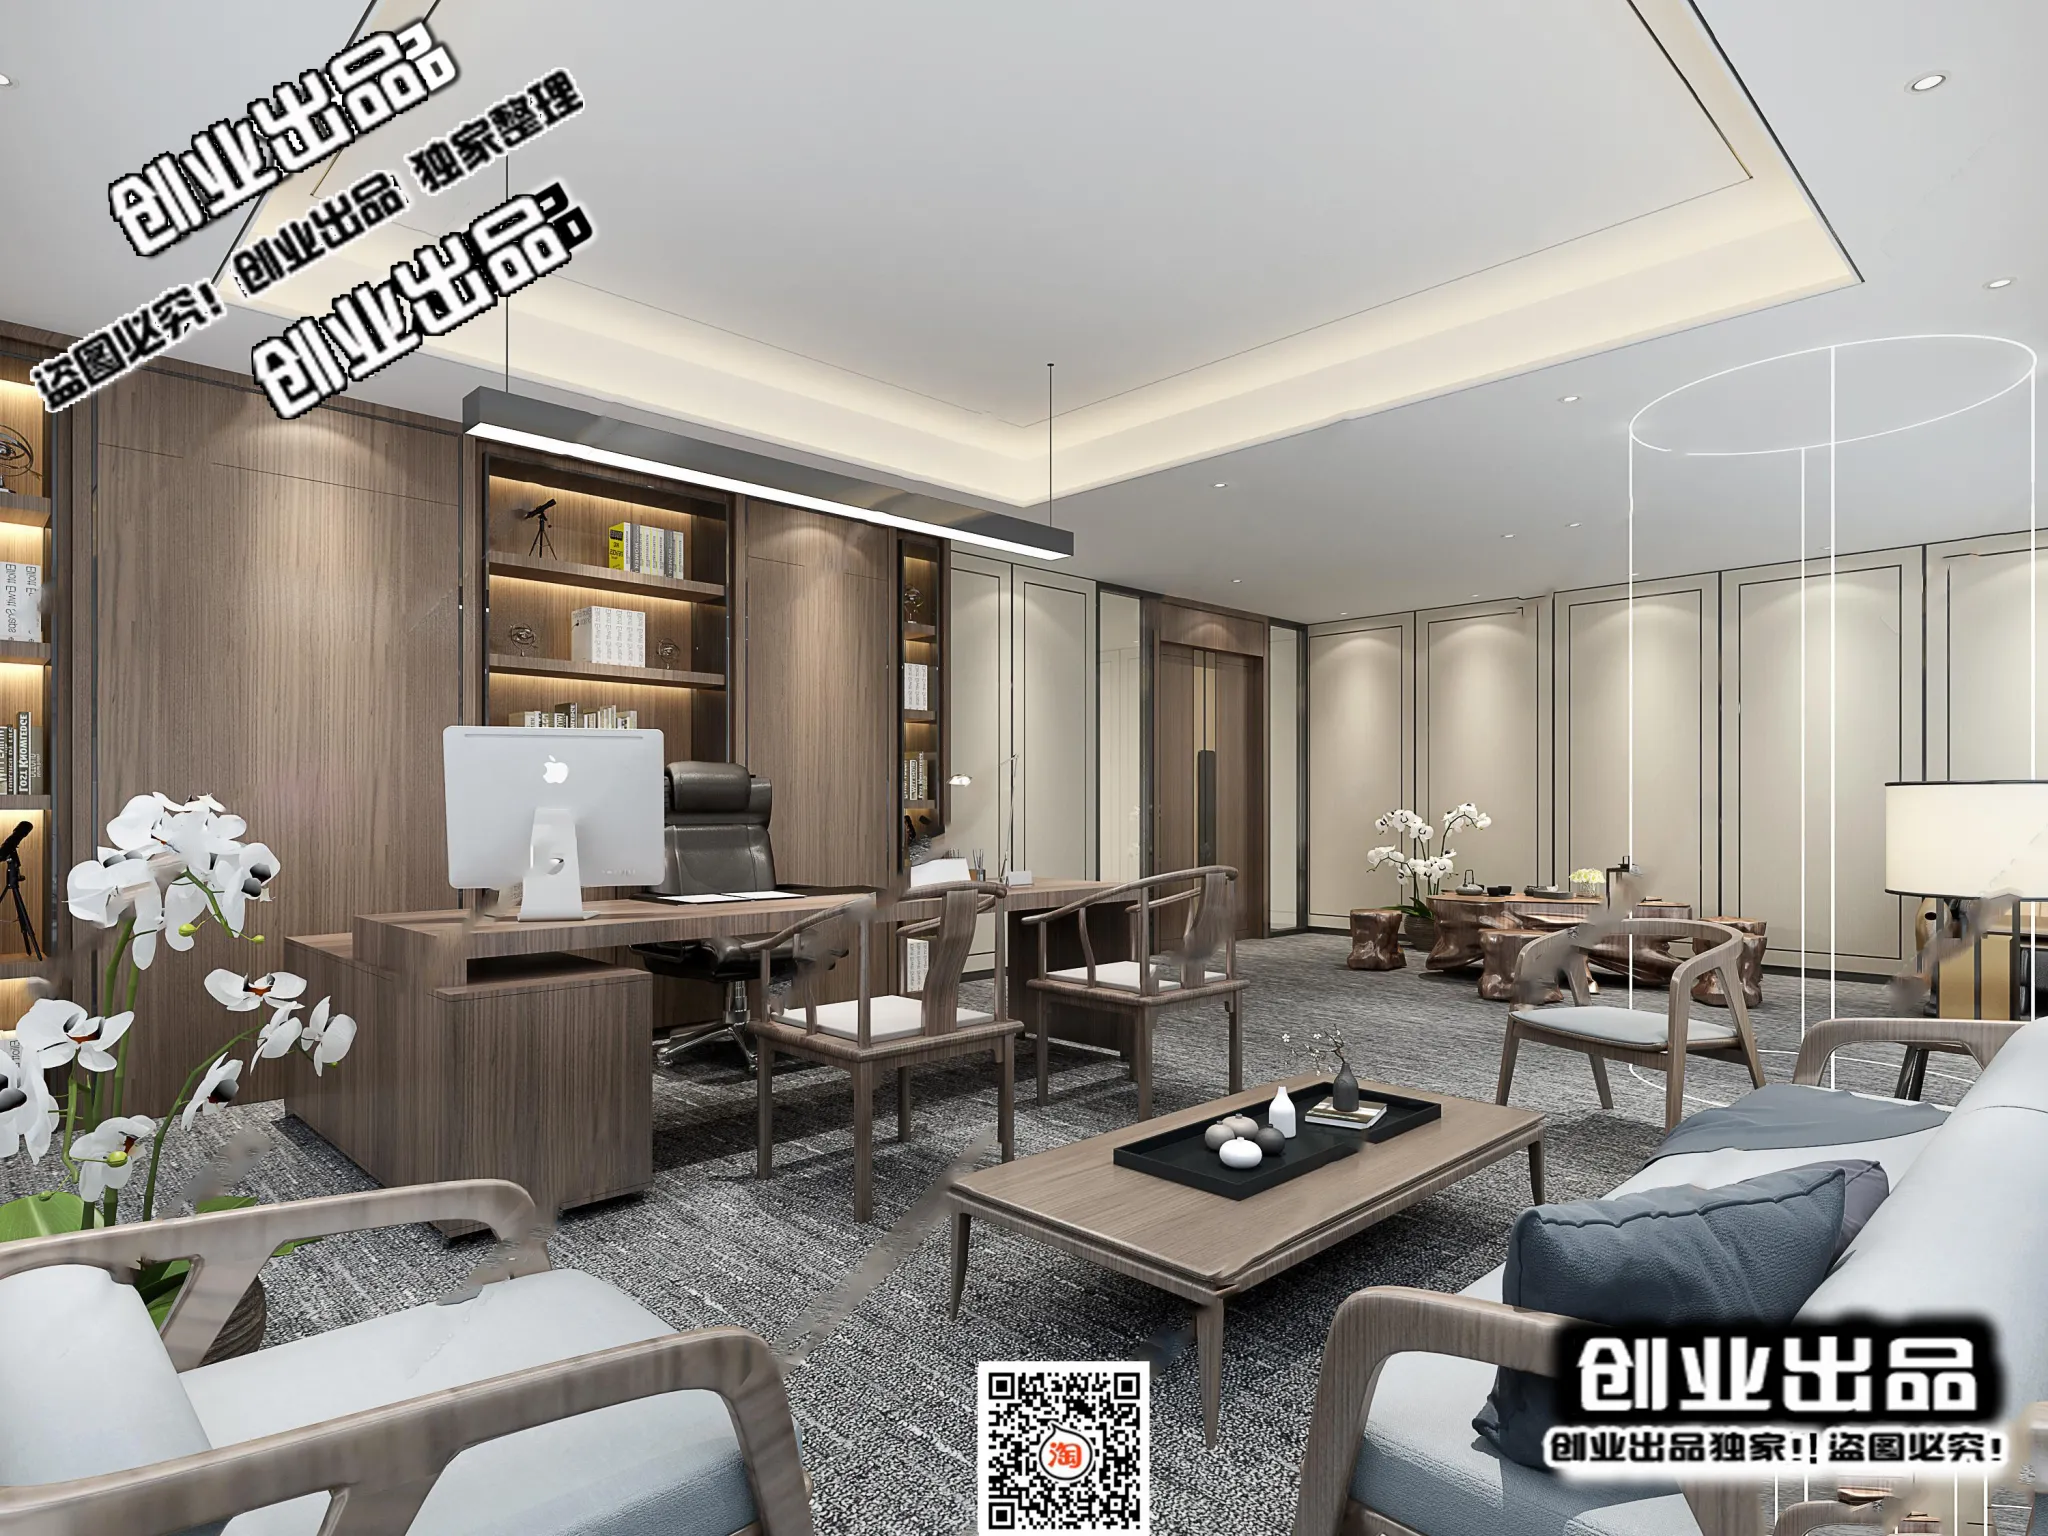 3D OFFICE INTERIOR (VRAY) – MANAGER ROOM 3D SCENES – 078